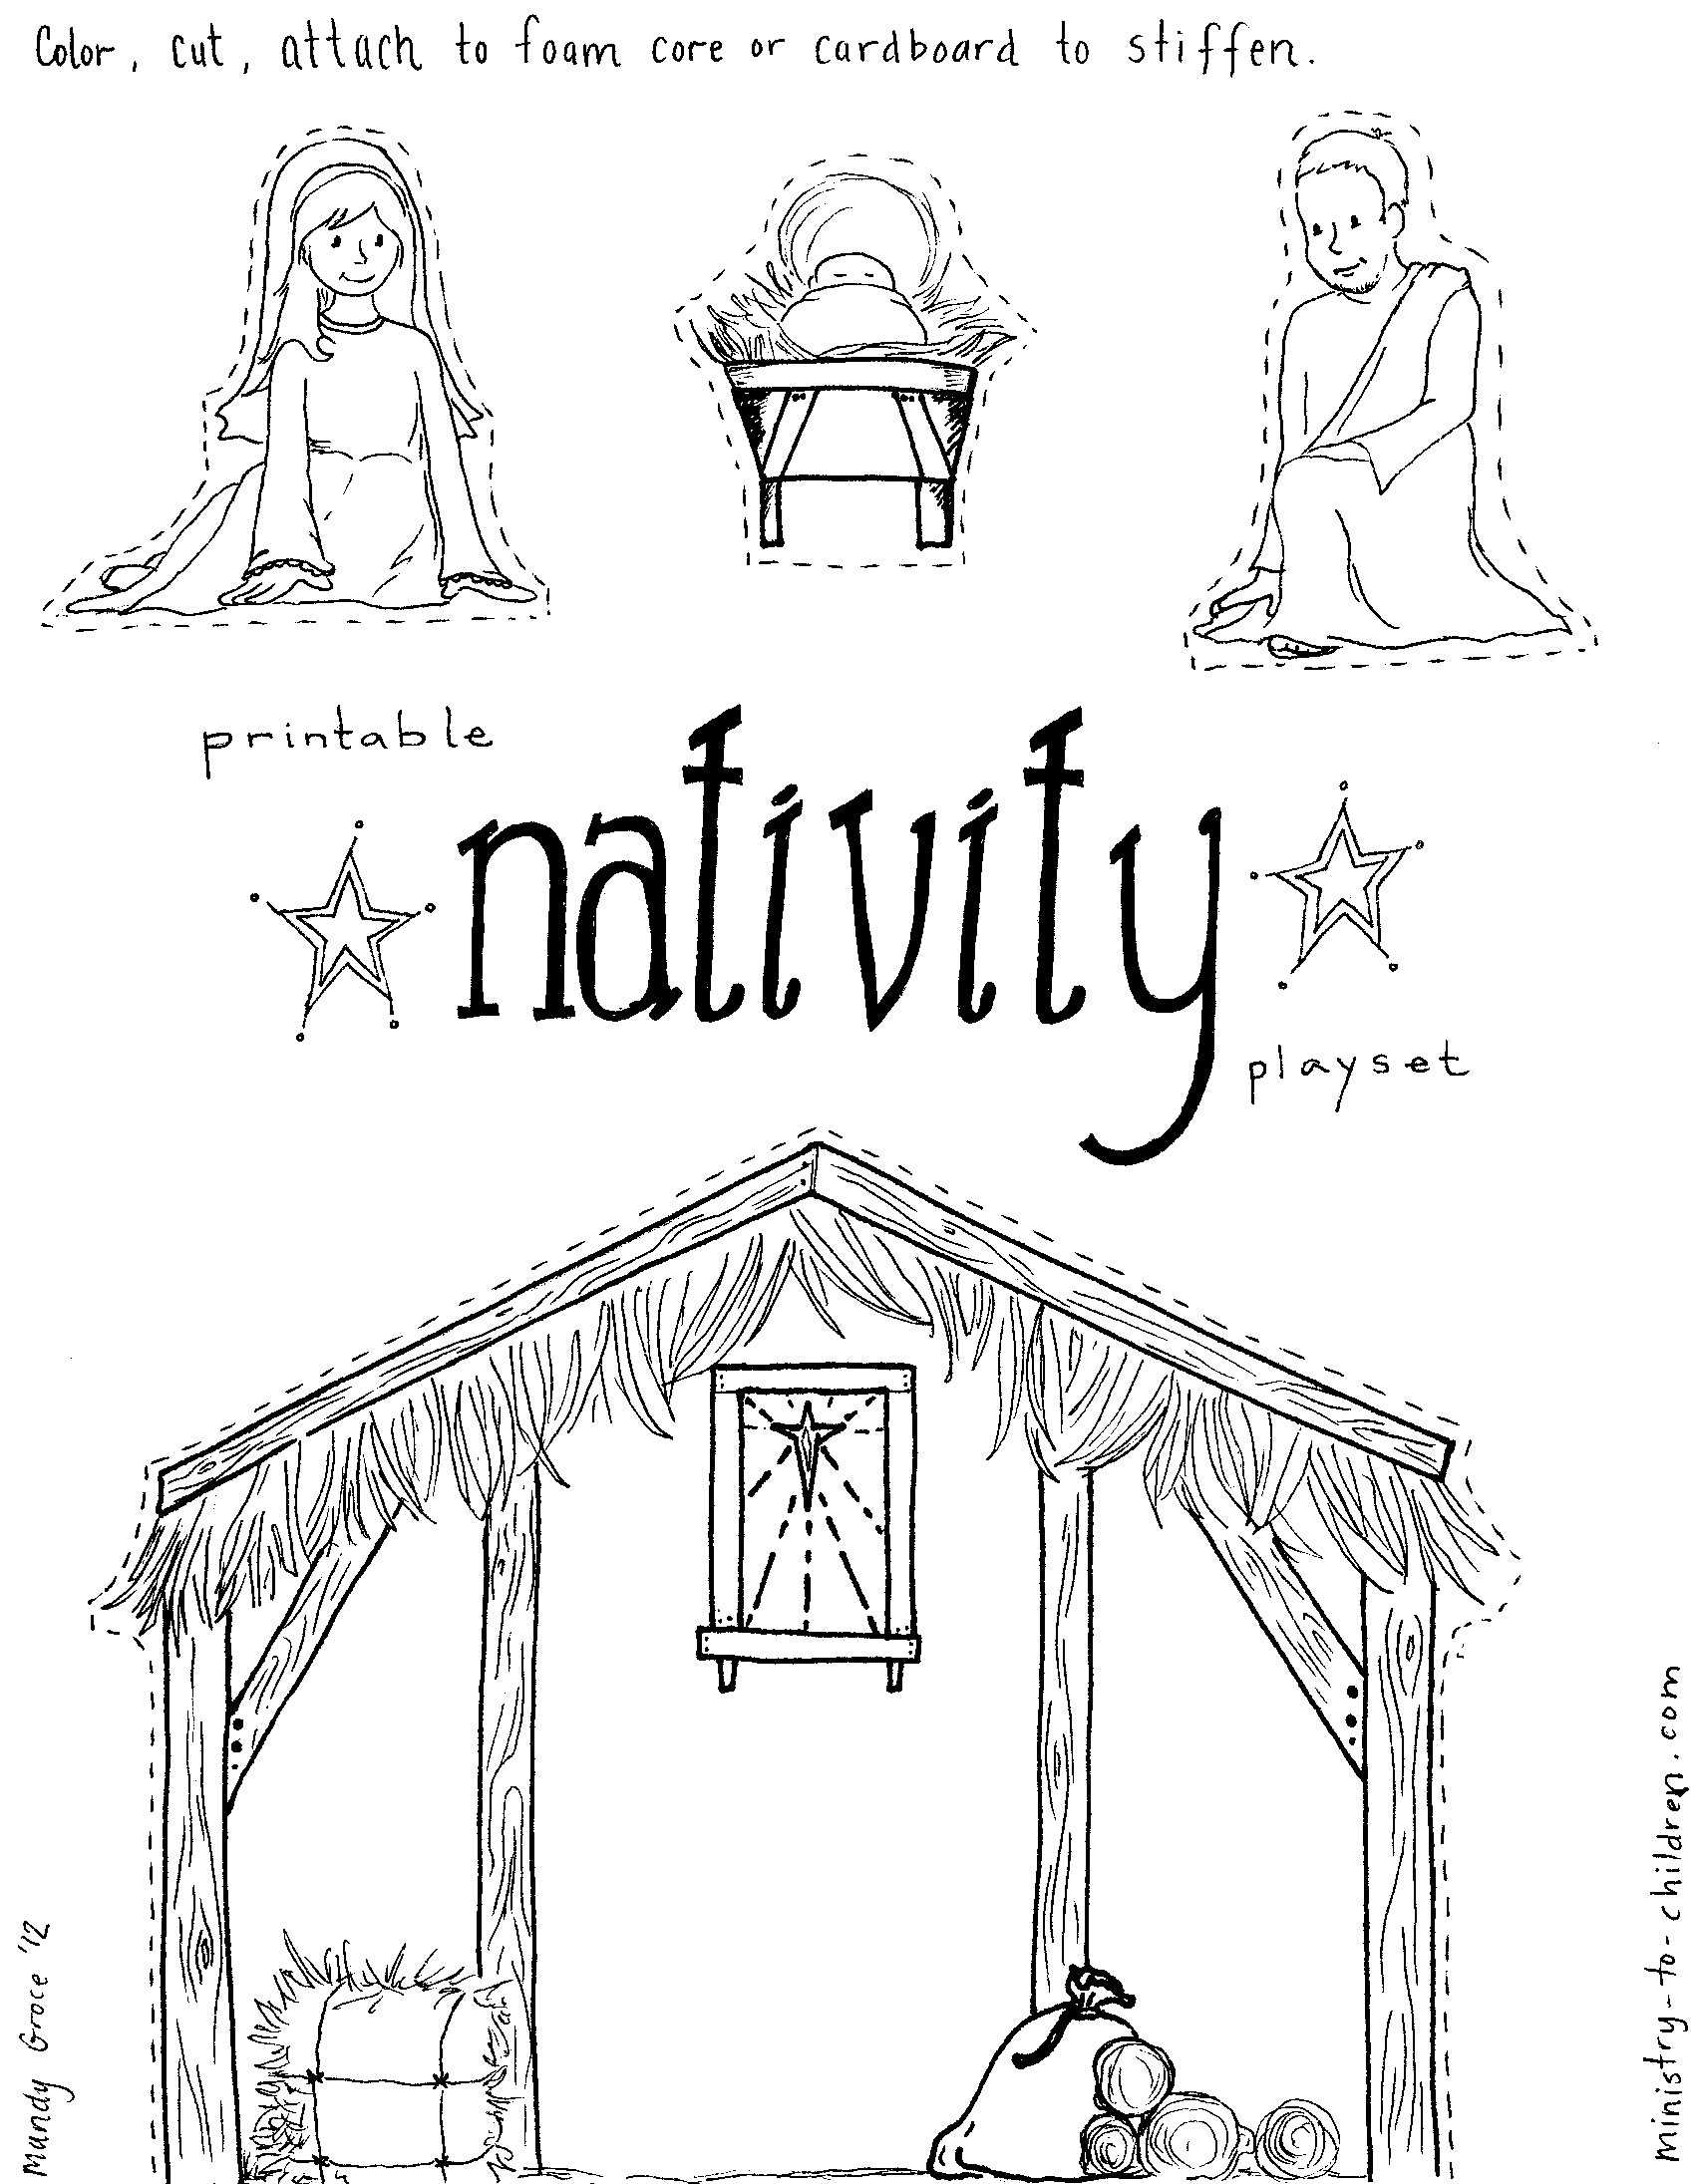 Nativity Coloring Pages For Preschool At Getcolorings.com | Free